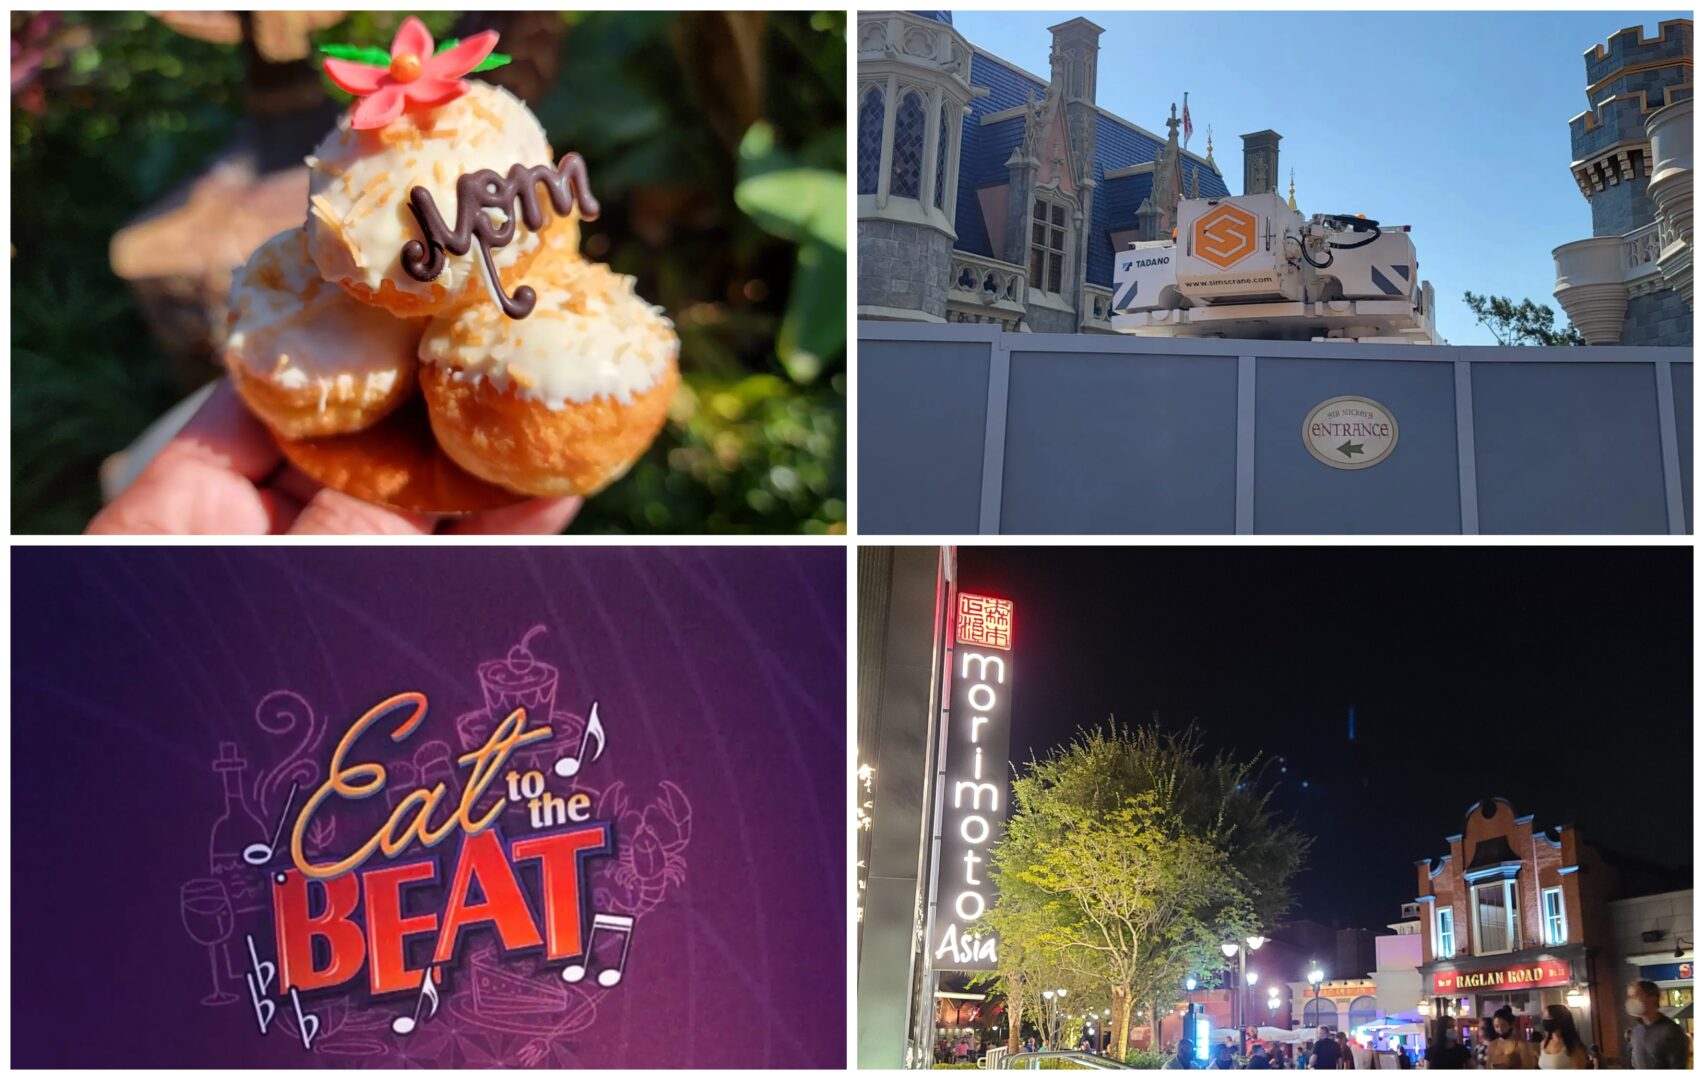 Disney News Highlights: Bob Iger Praises Universal ‘Super Mario Bros’ Movie, Dole Whip Creme Puffs, Disney + Subscription Price Increase, Eat to The Beat Concert Line-Up